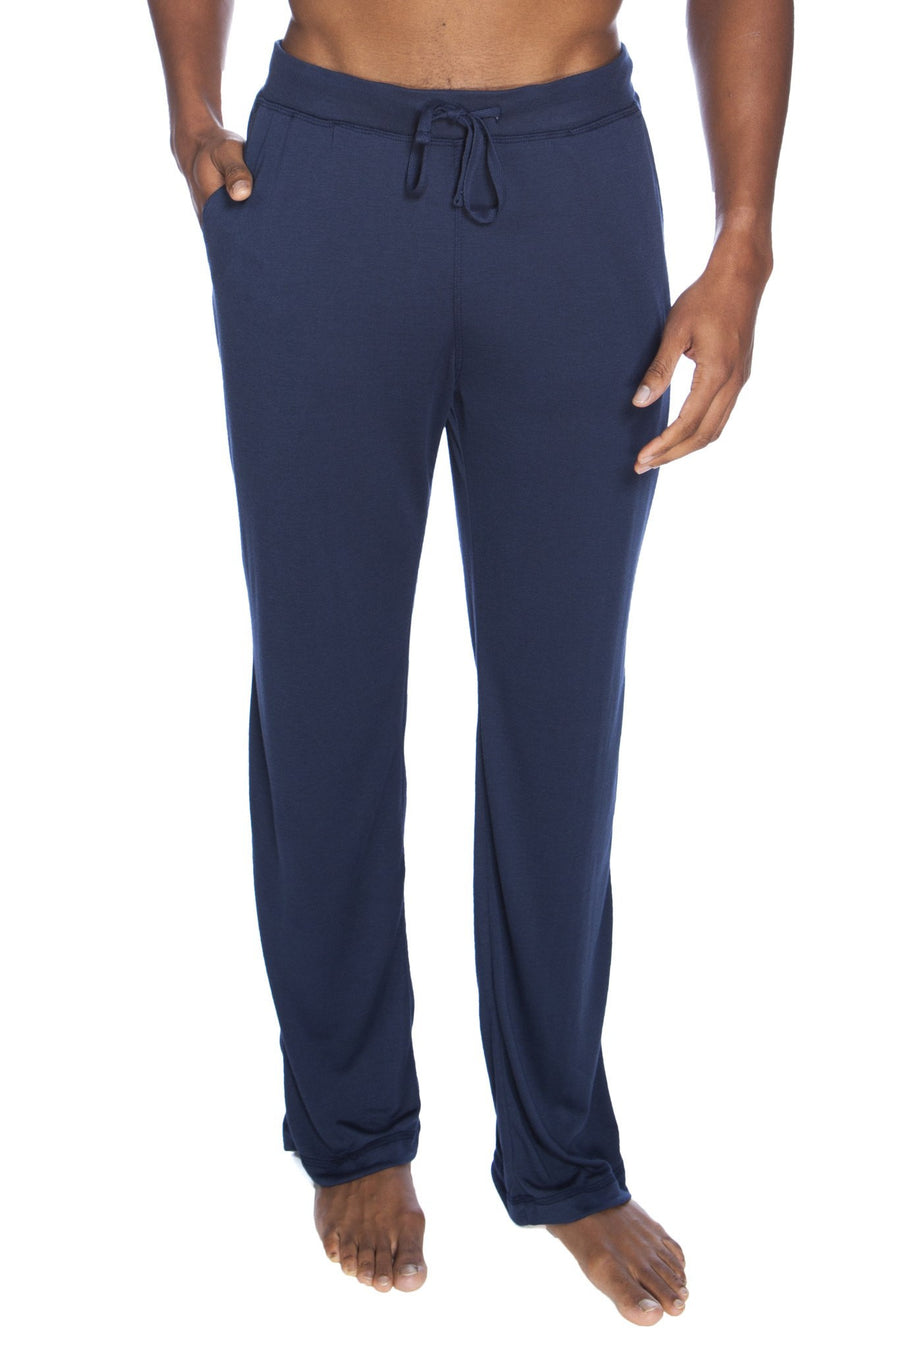 DT Shelby Tie-ankle pants in Navy